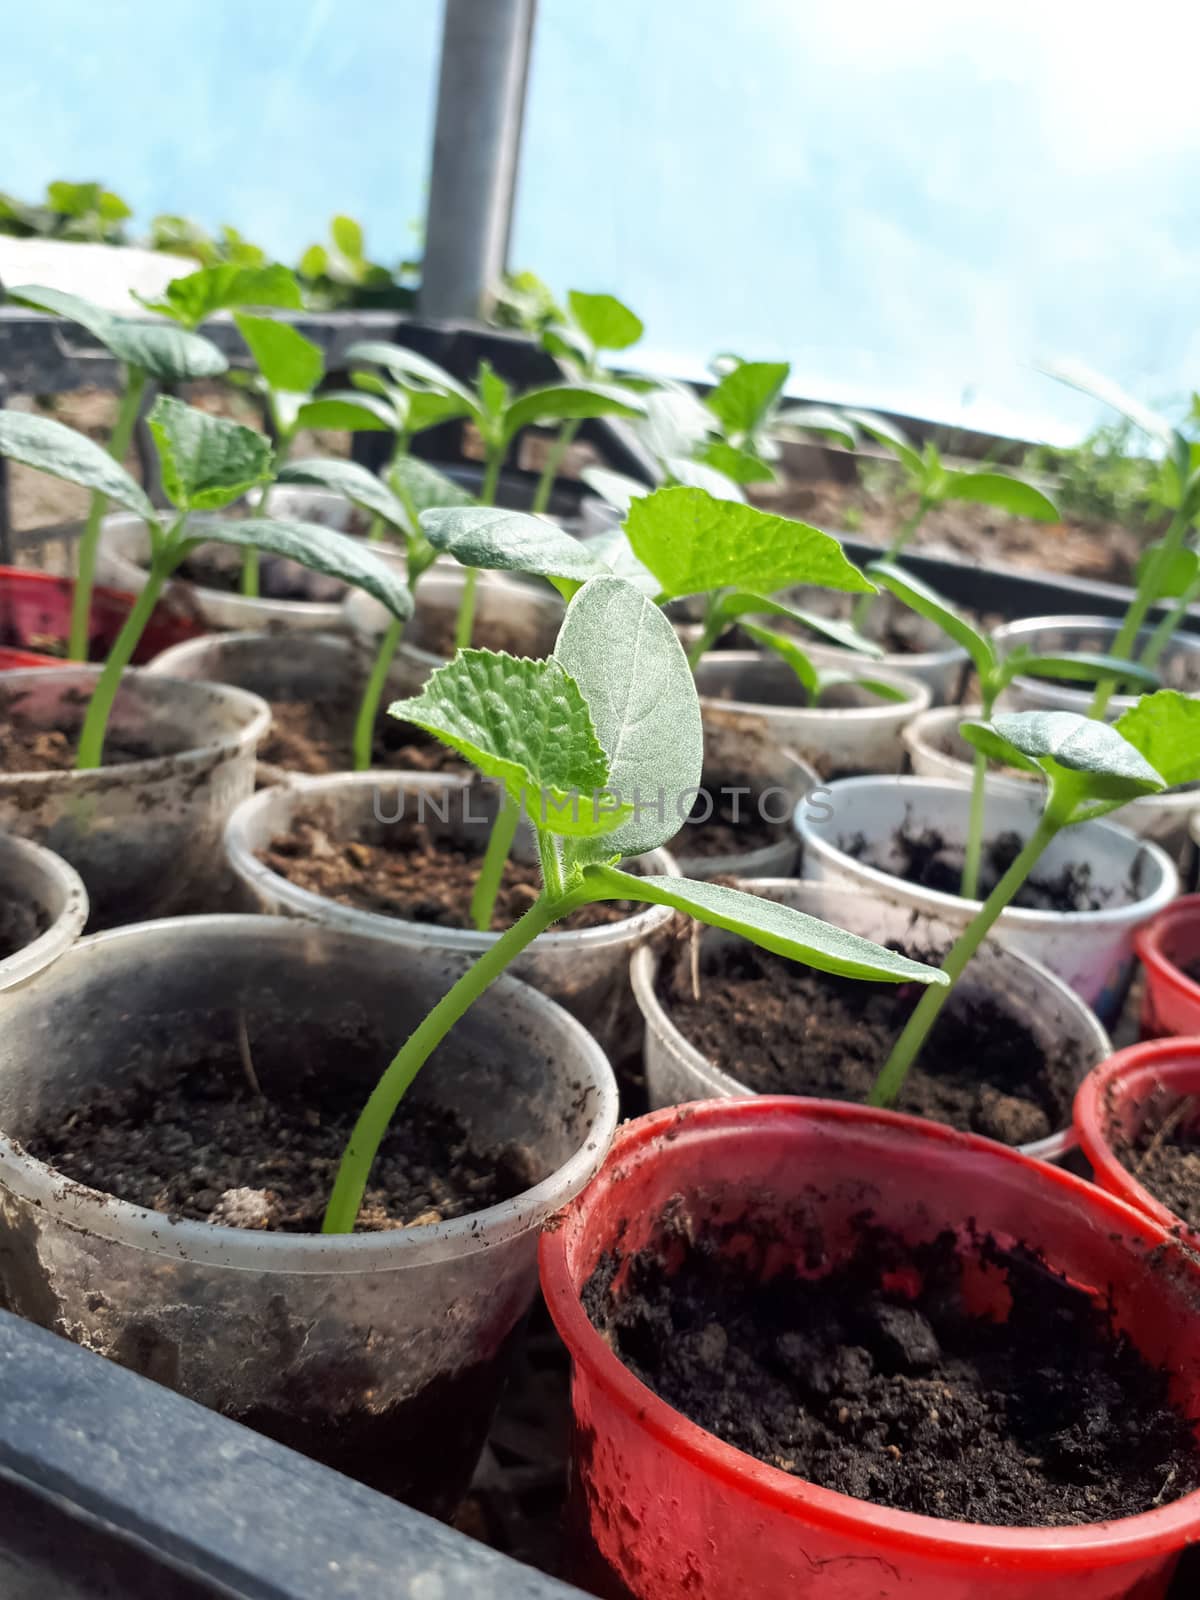 Seedlings of cucumbers in glasses in a greenhouse.